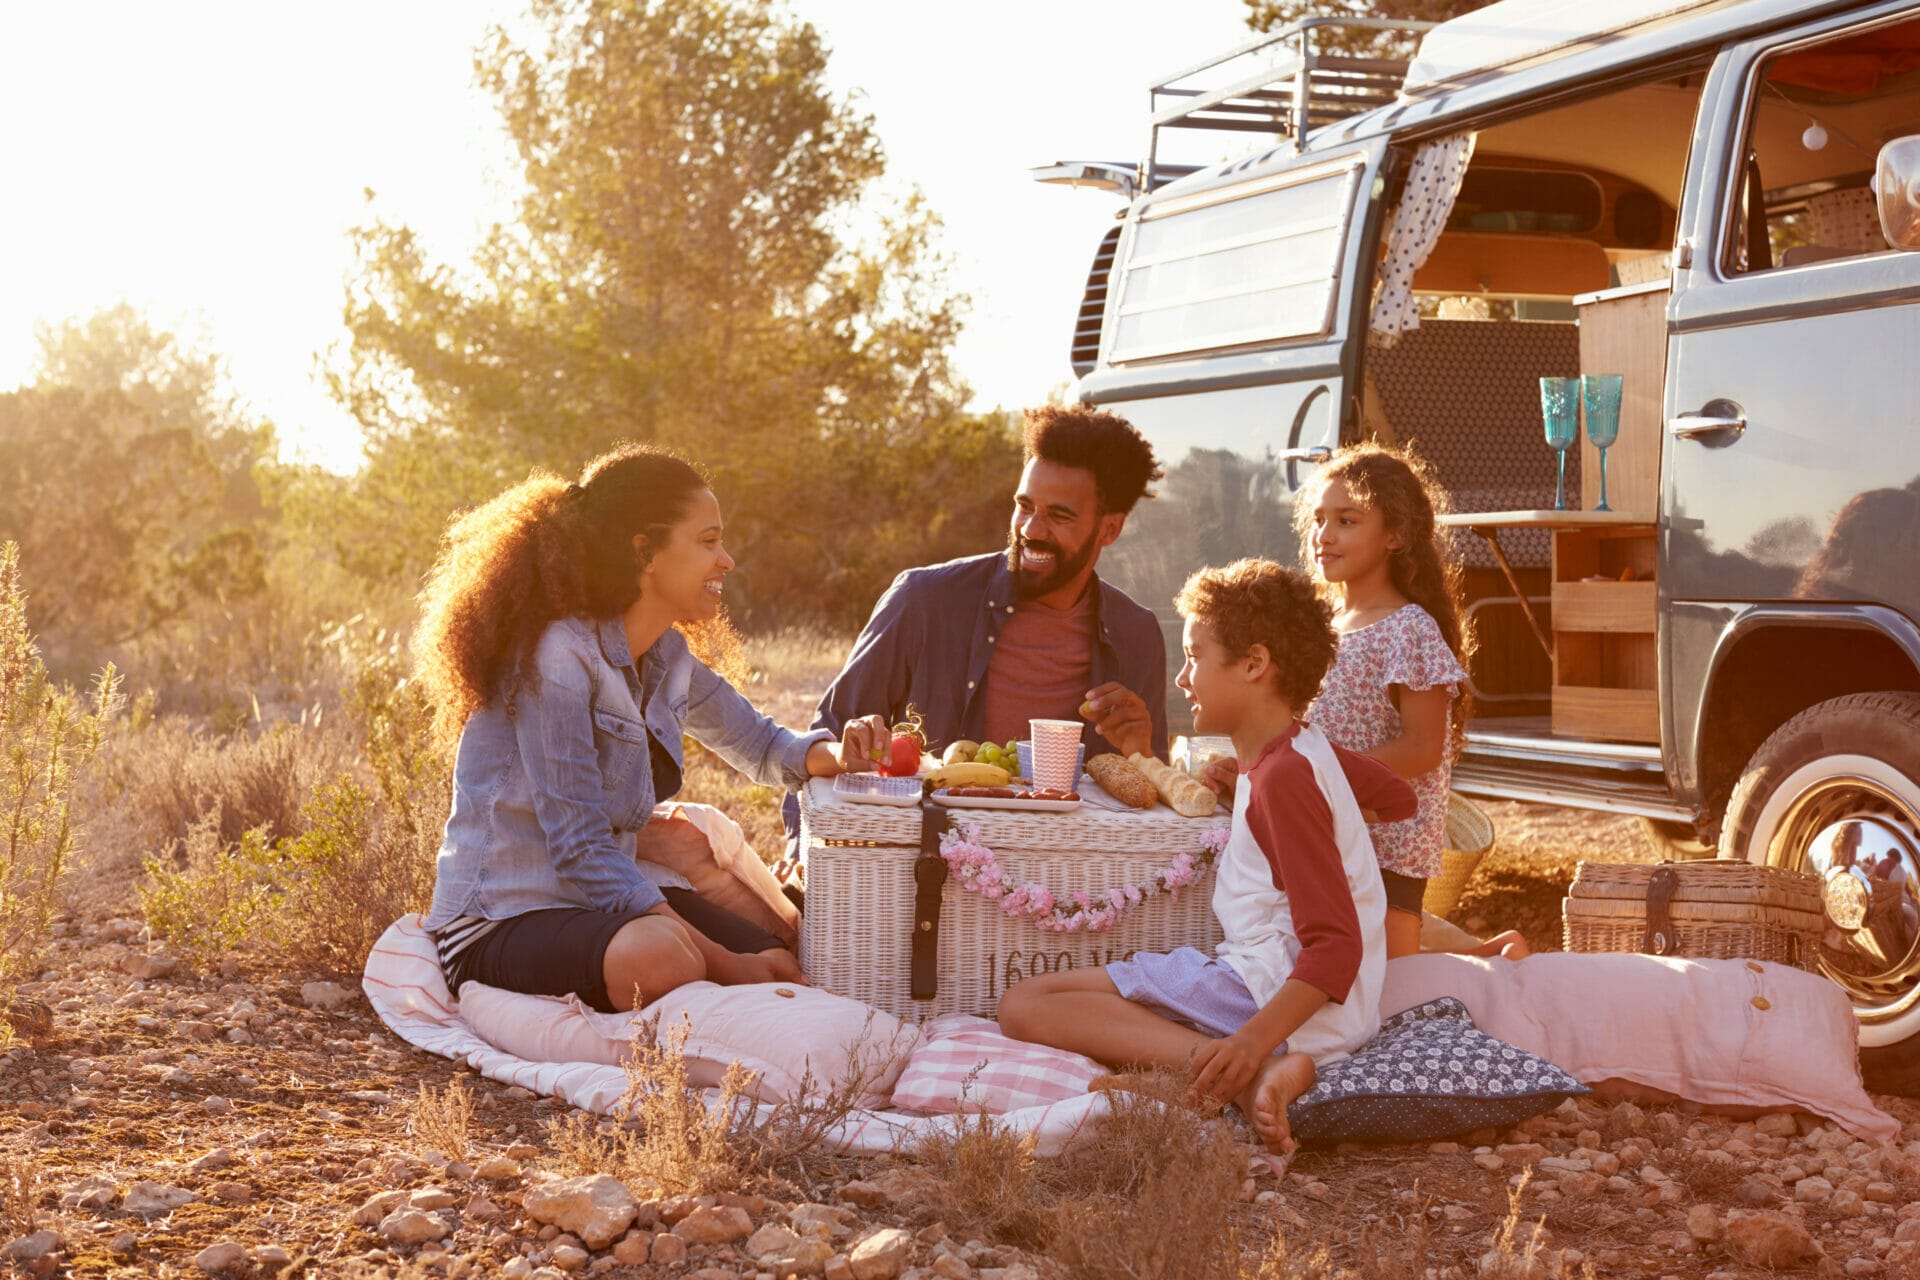 How To Stay Healthy And Safe On An RV Trip With Kids